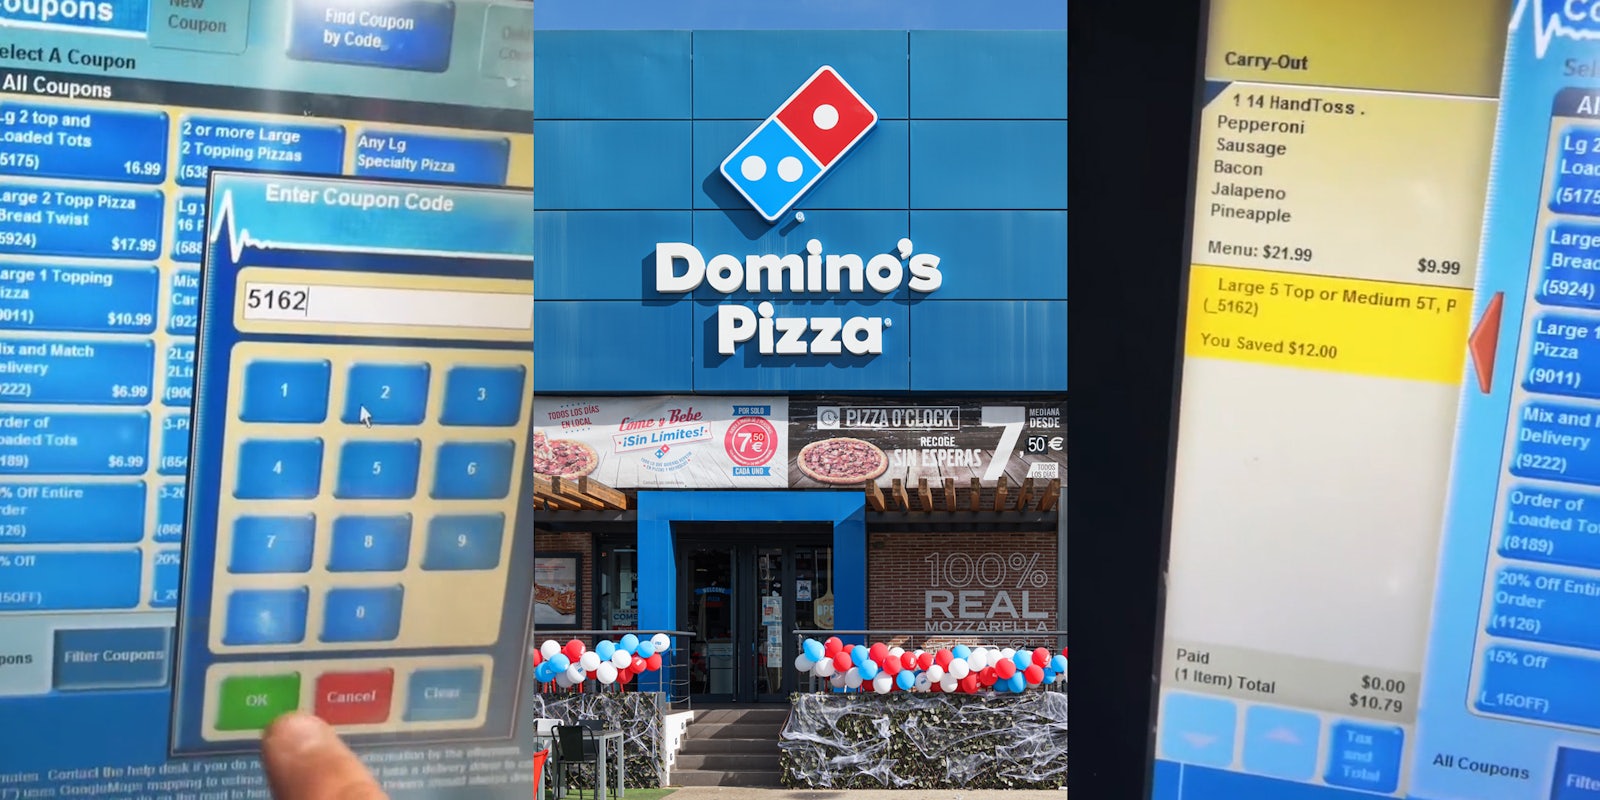 Domino's worker typing code into computer 5162 (l) Domino's pizza building with sign (c) Domino's computer screen showing $12 saved (r)